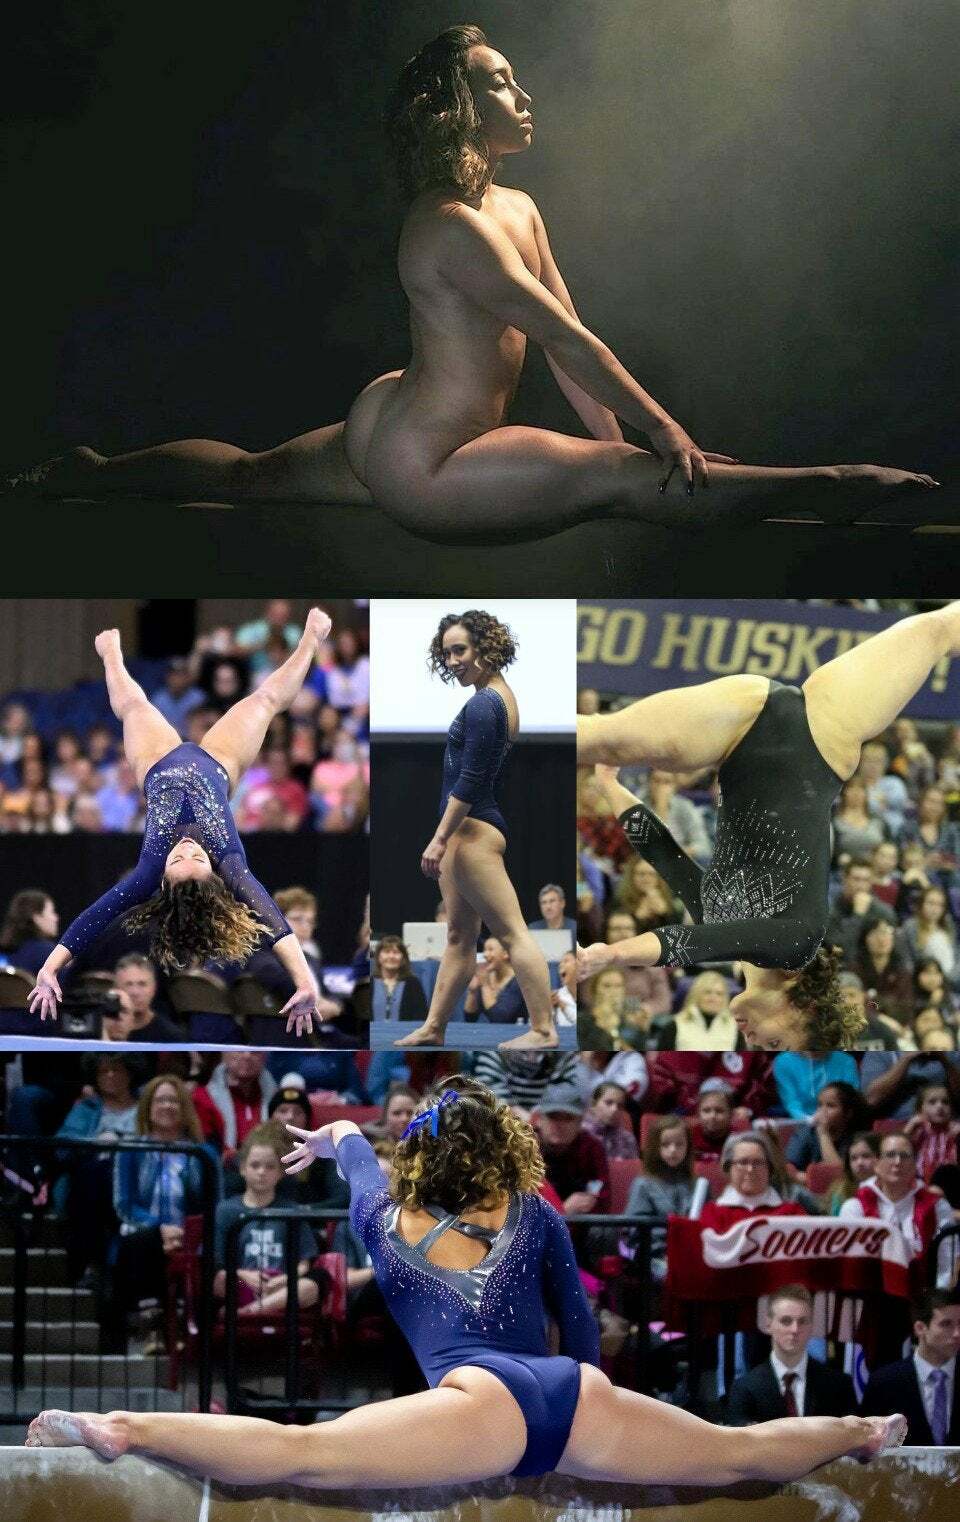 Every position. Katelyn Ohashi's plump pussy and ass would get it in every fucking position.